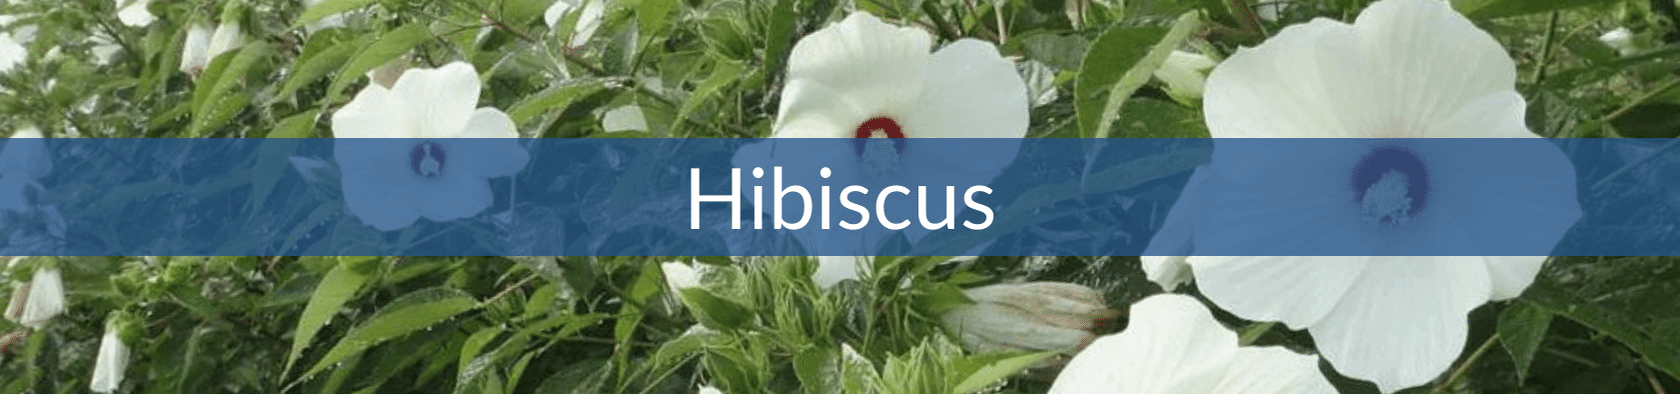 Hibiscus (1).png__PID:ddb41dfd-4a15-4be4-bf41-ea1c98a21cd0